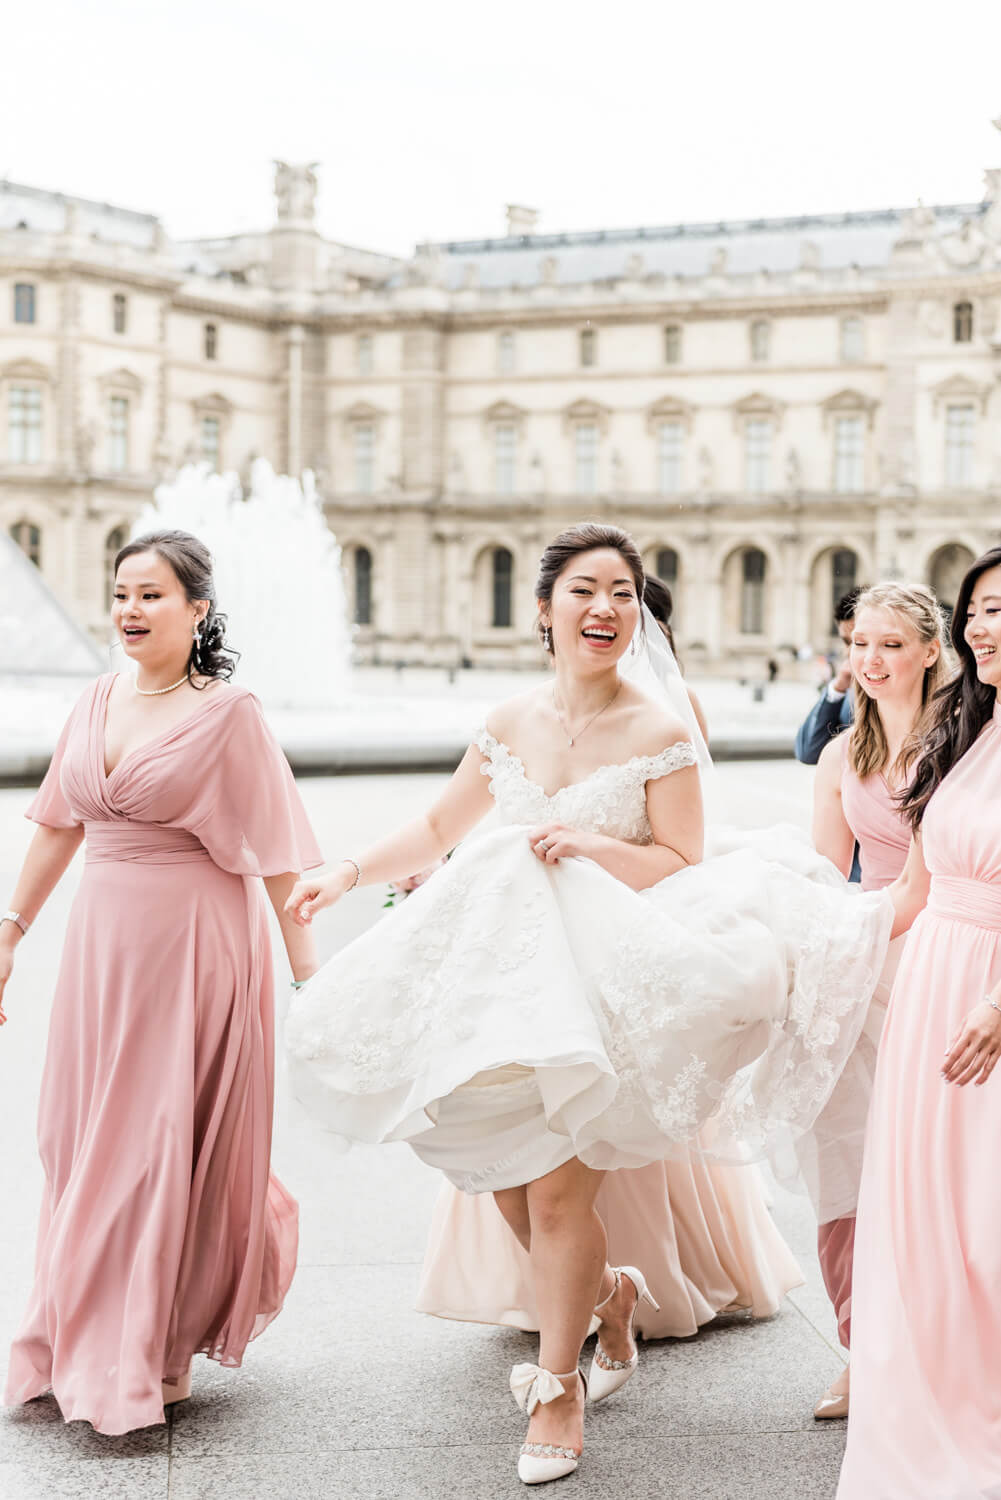 A bride and her bridesmaids walk at the Place du Louvre in Paris